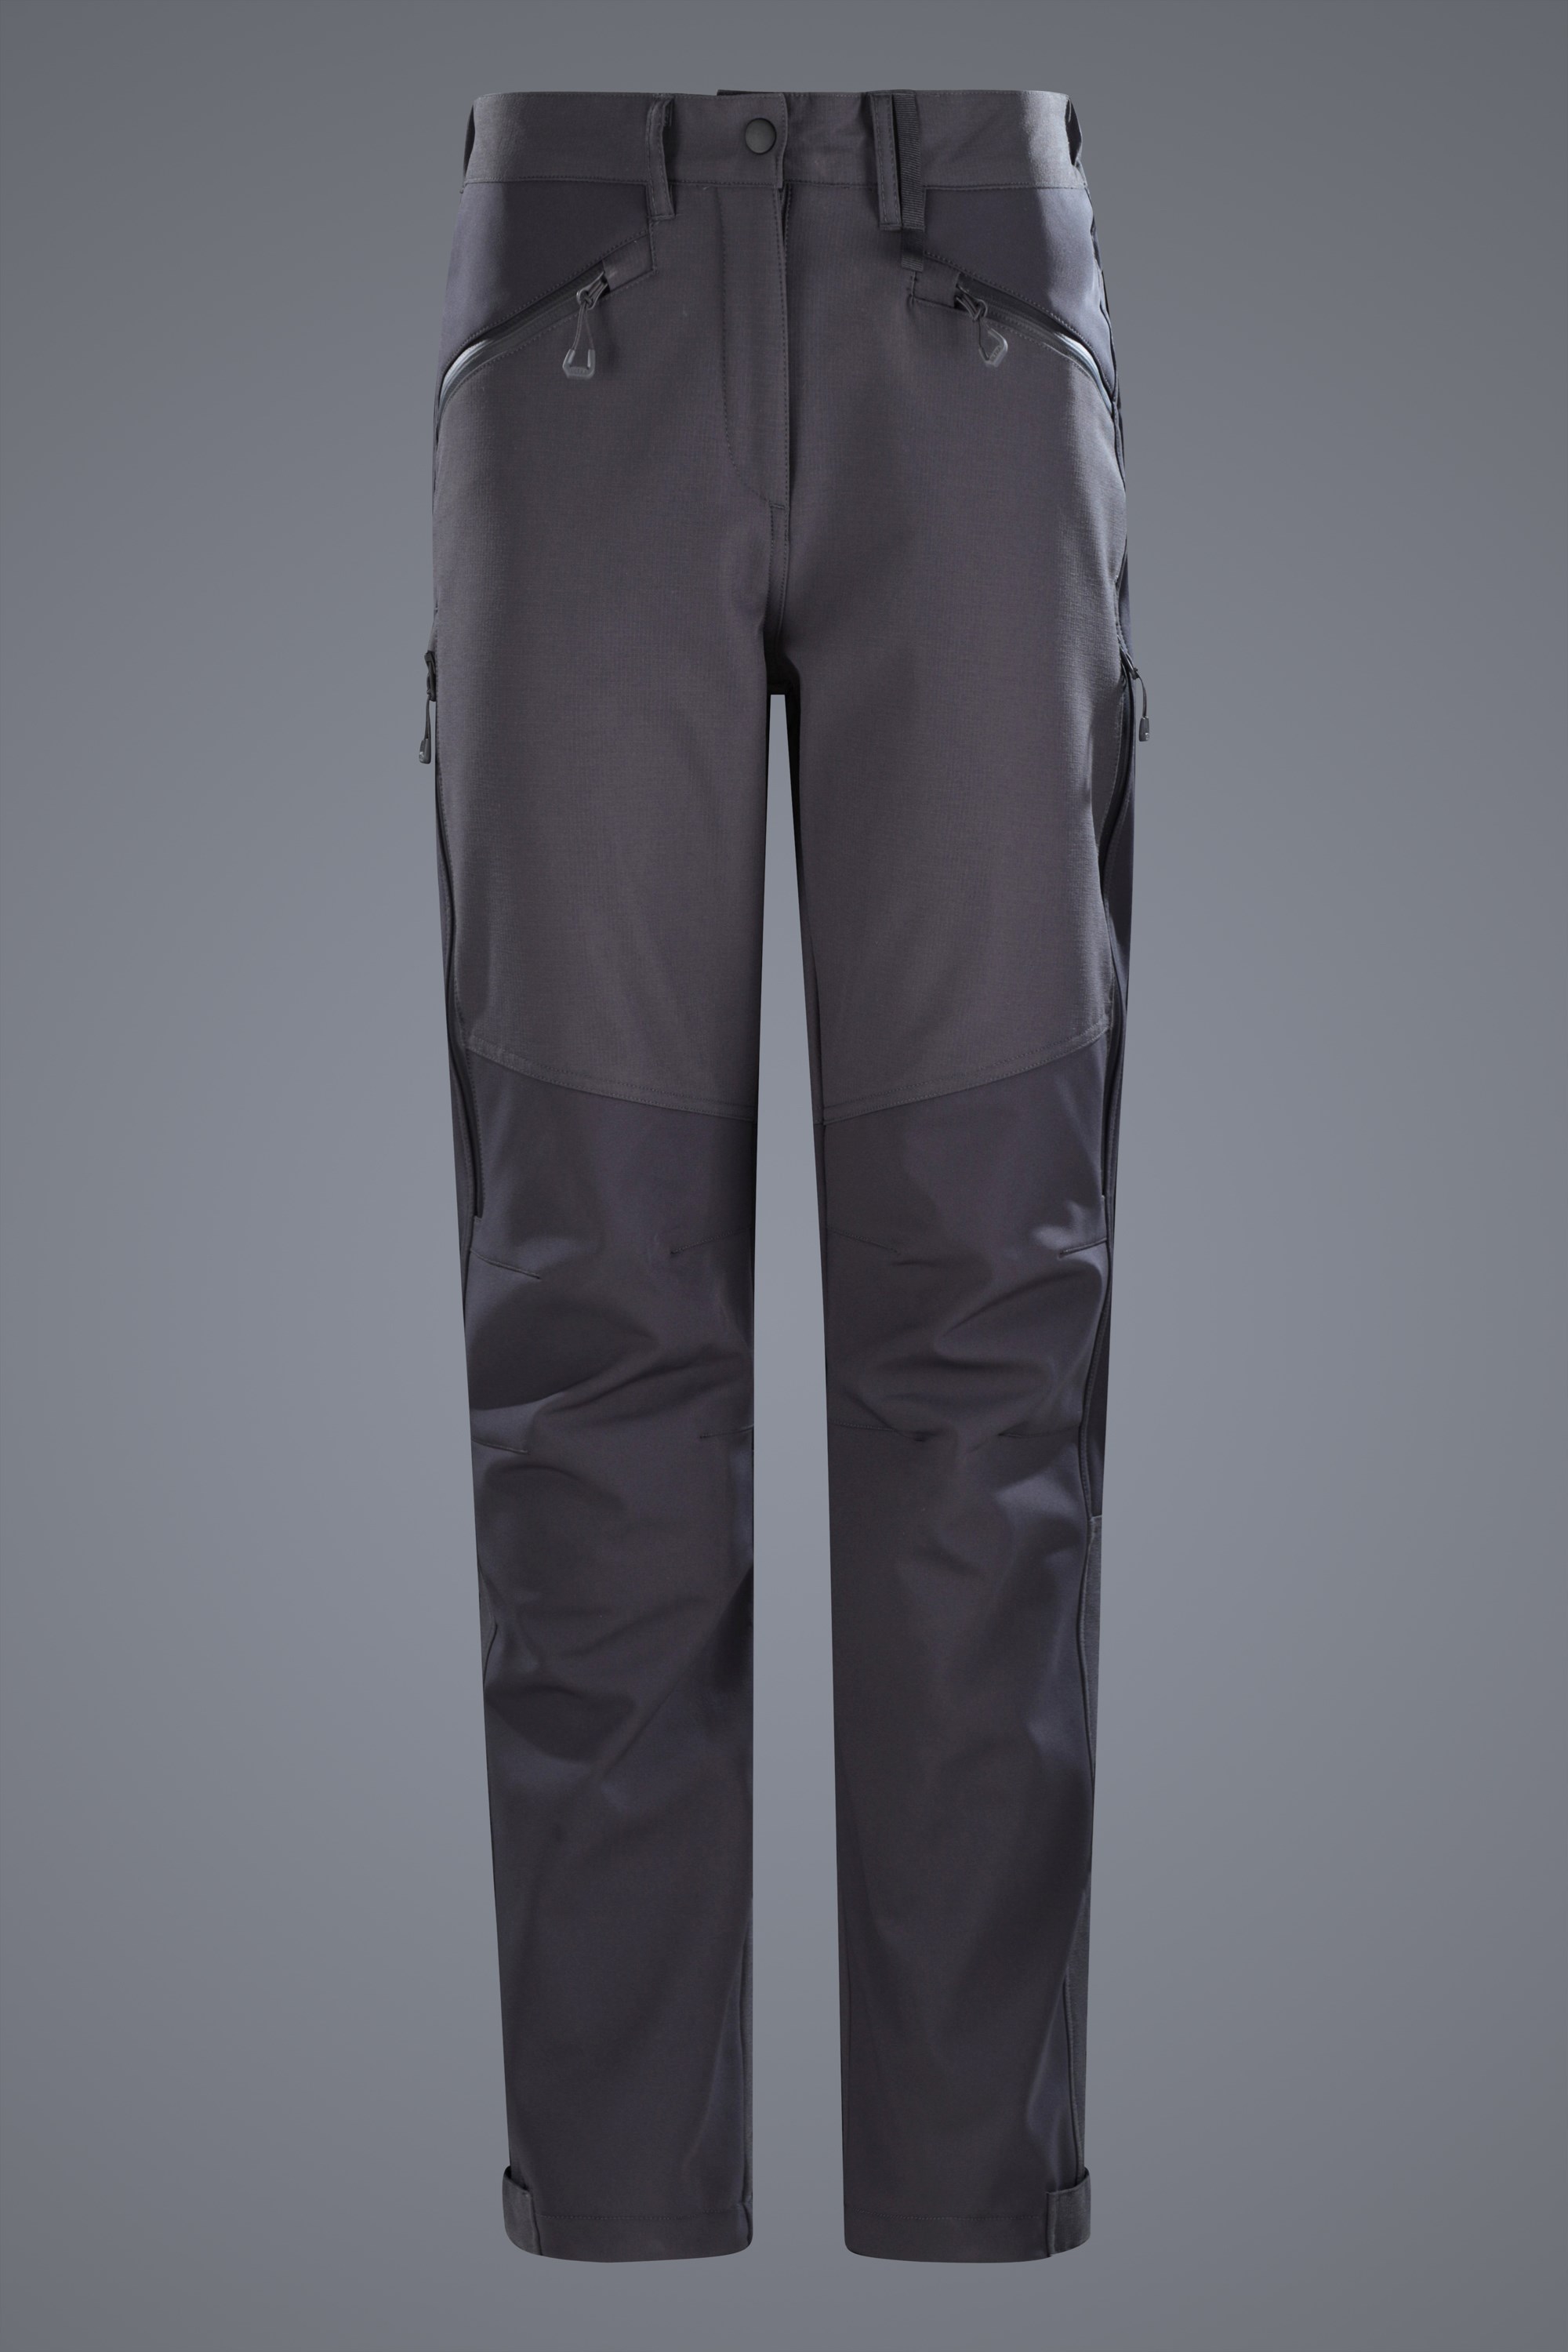 Buy Mountain Warehouse Explore Convertible Mens Walking Trousers g from  Next Greece